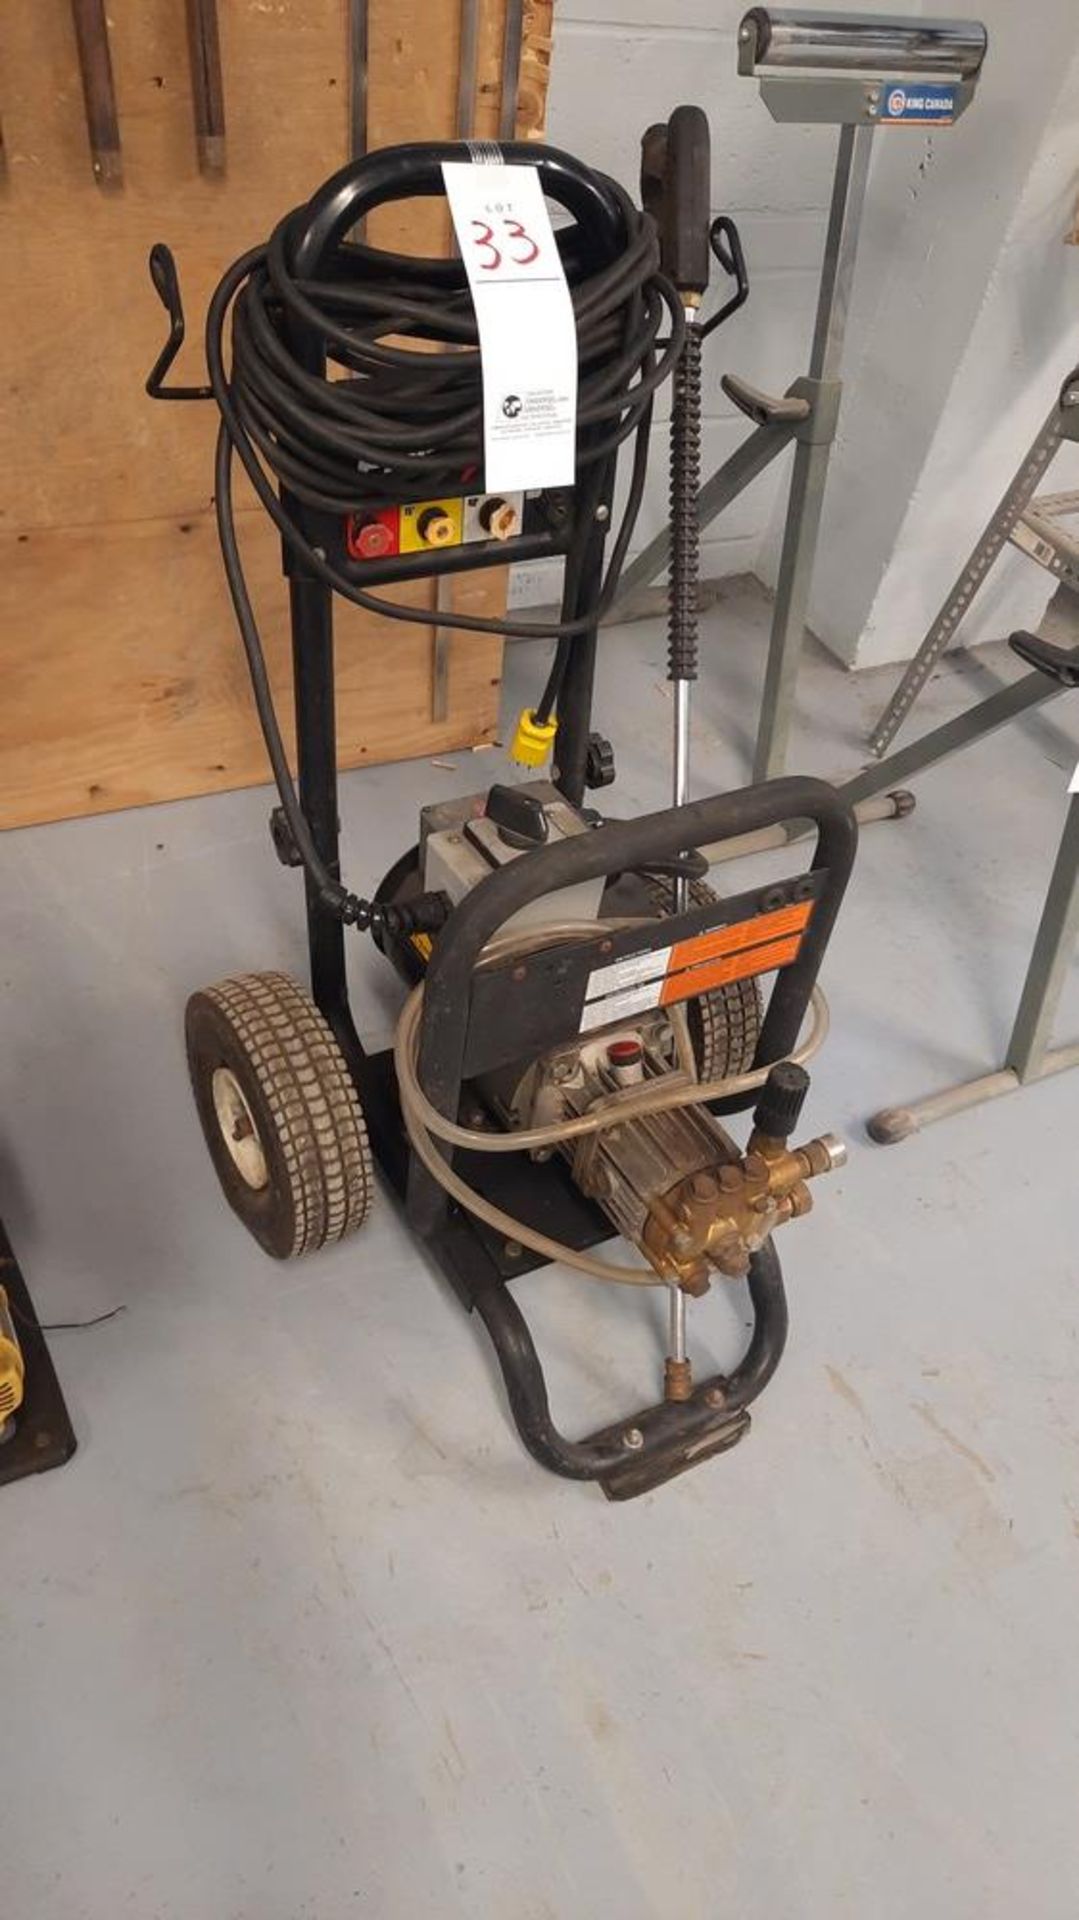 POWER EASE Power Washer